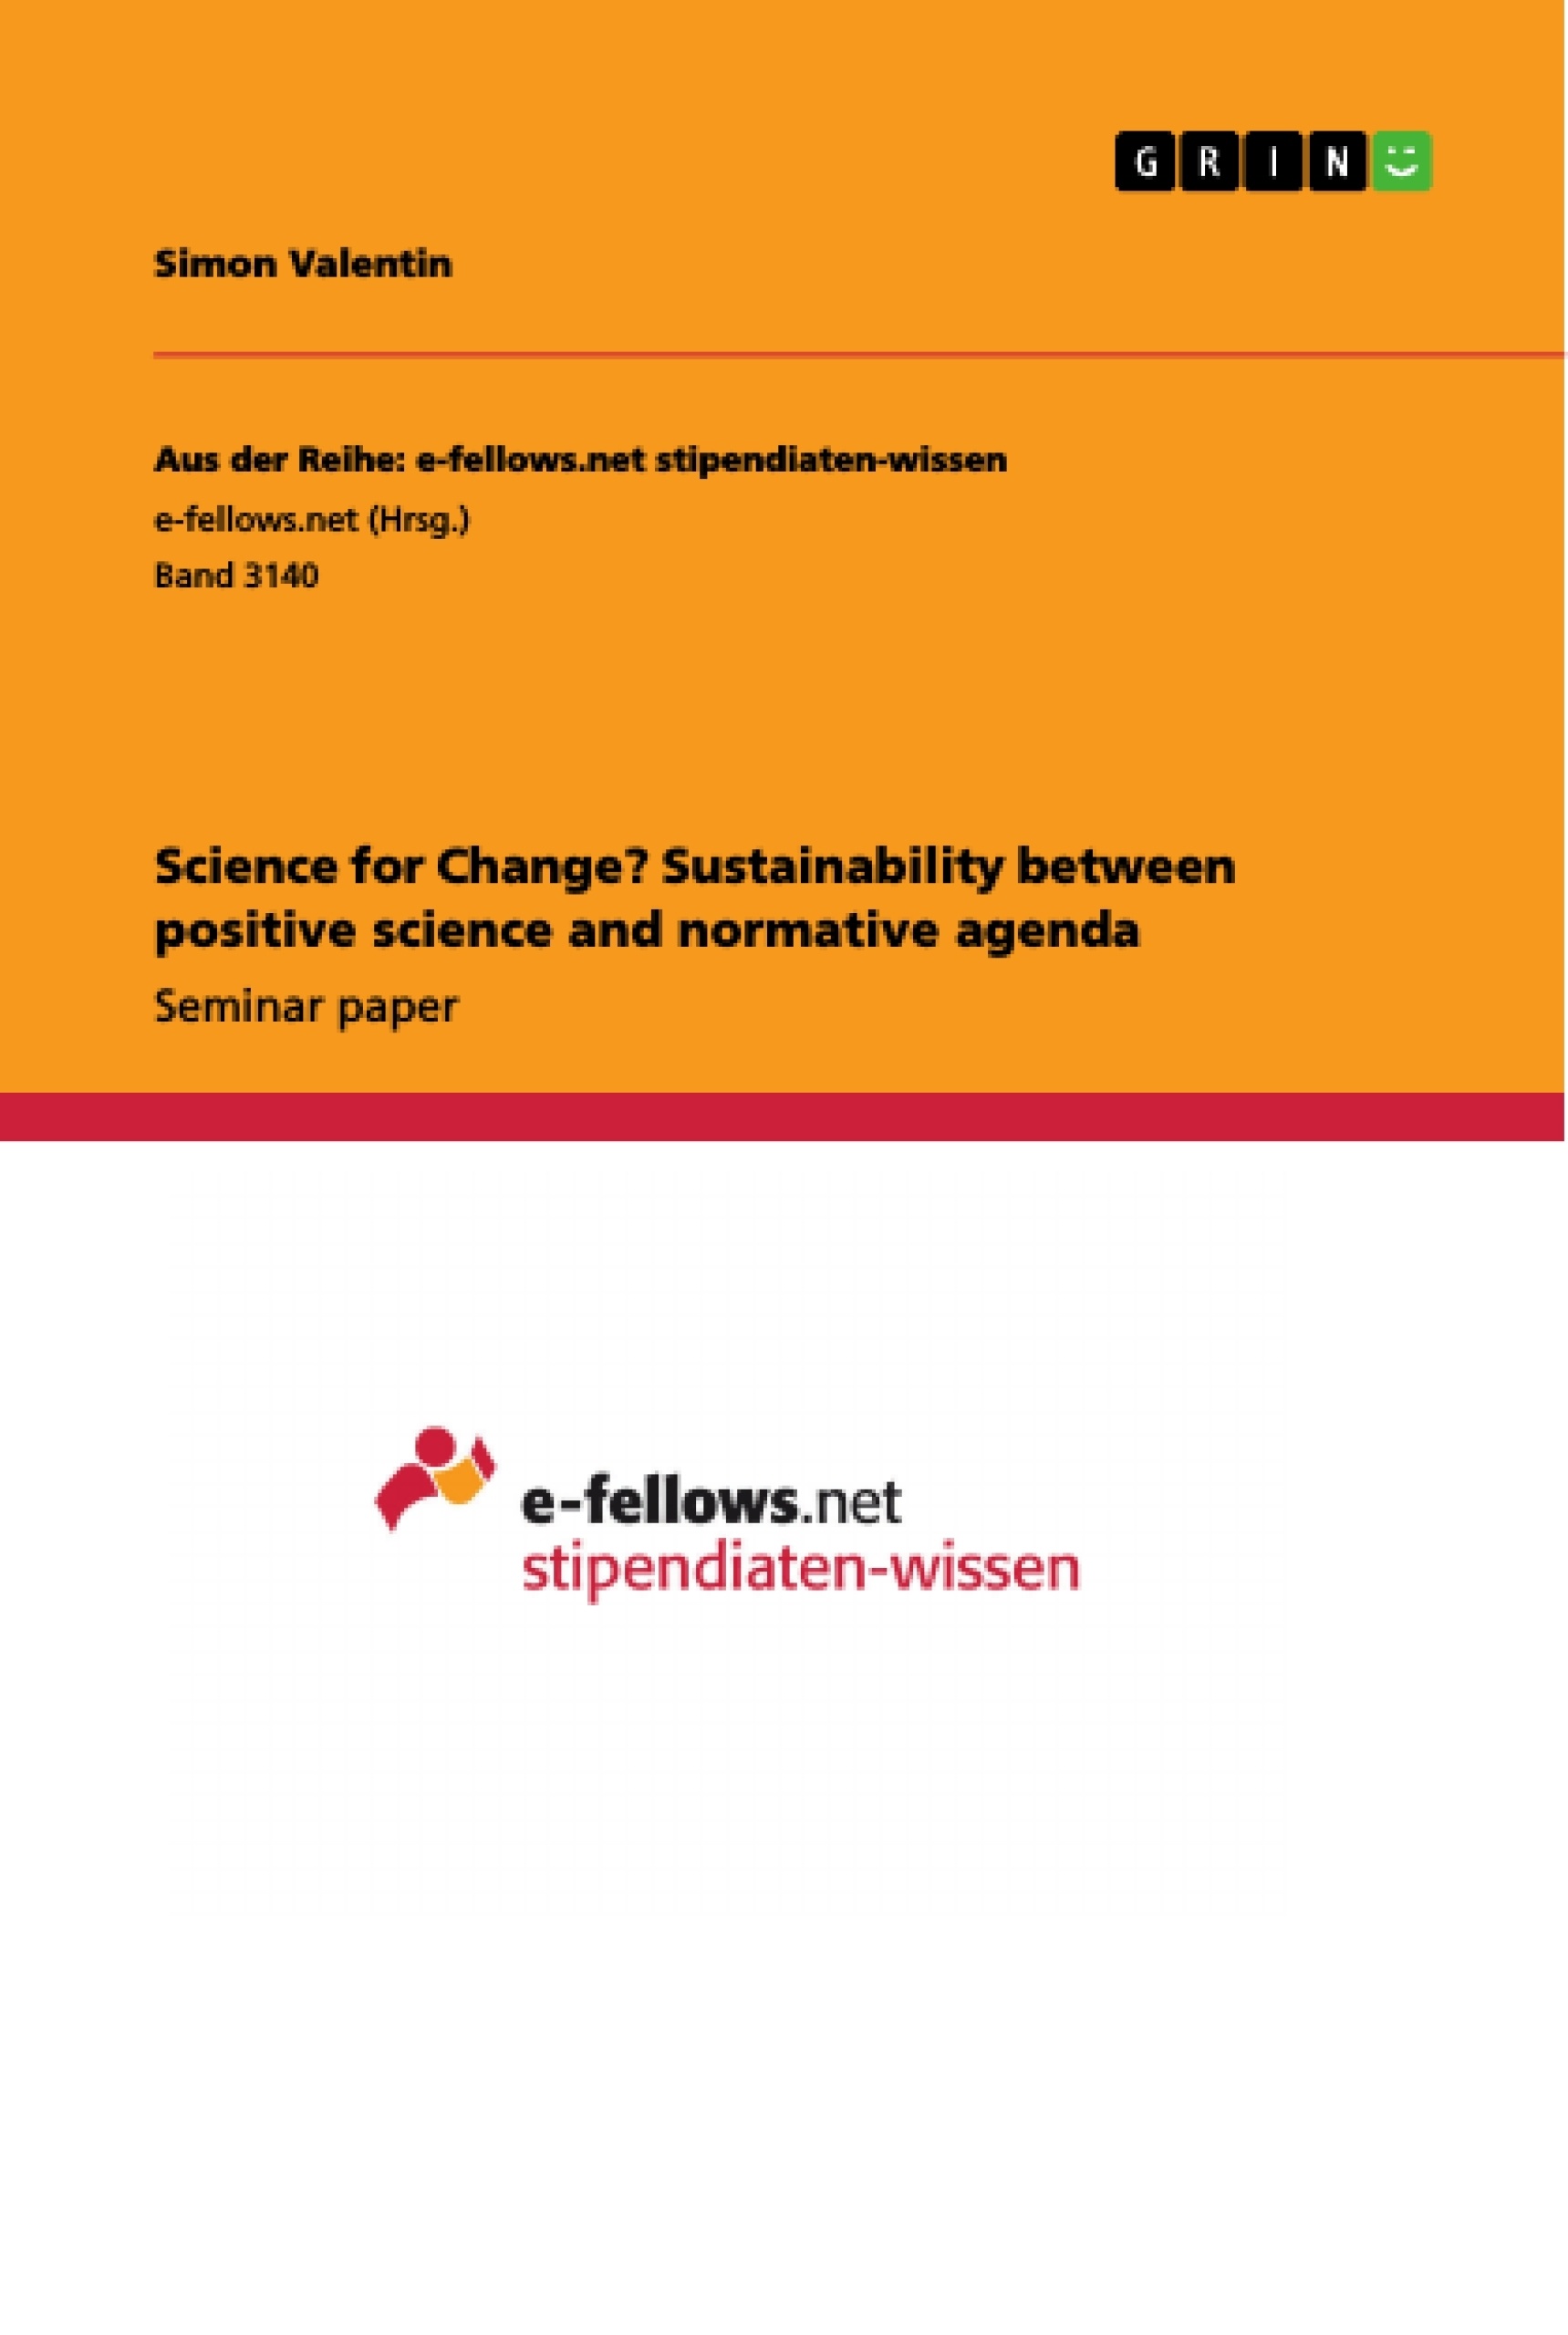 Titre: Science for Change? Sustainability between positive science and normative agenda